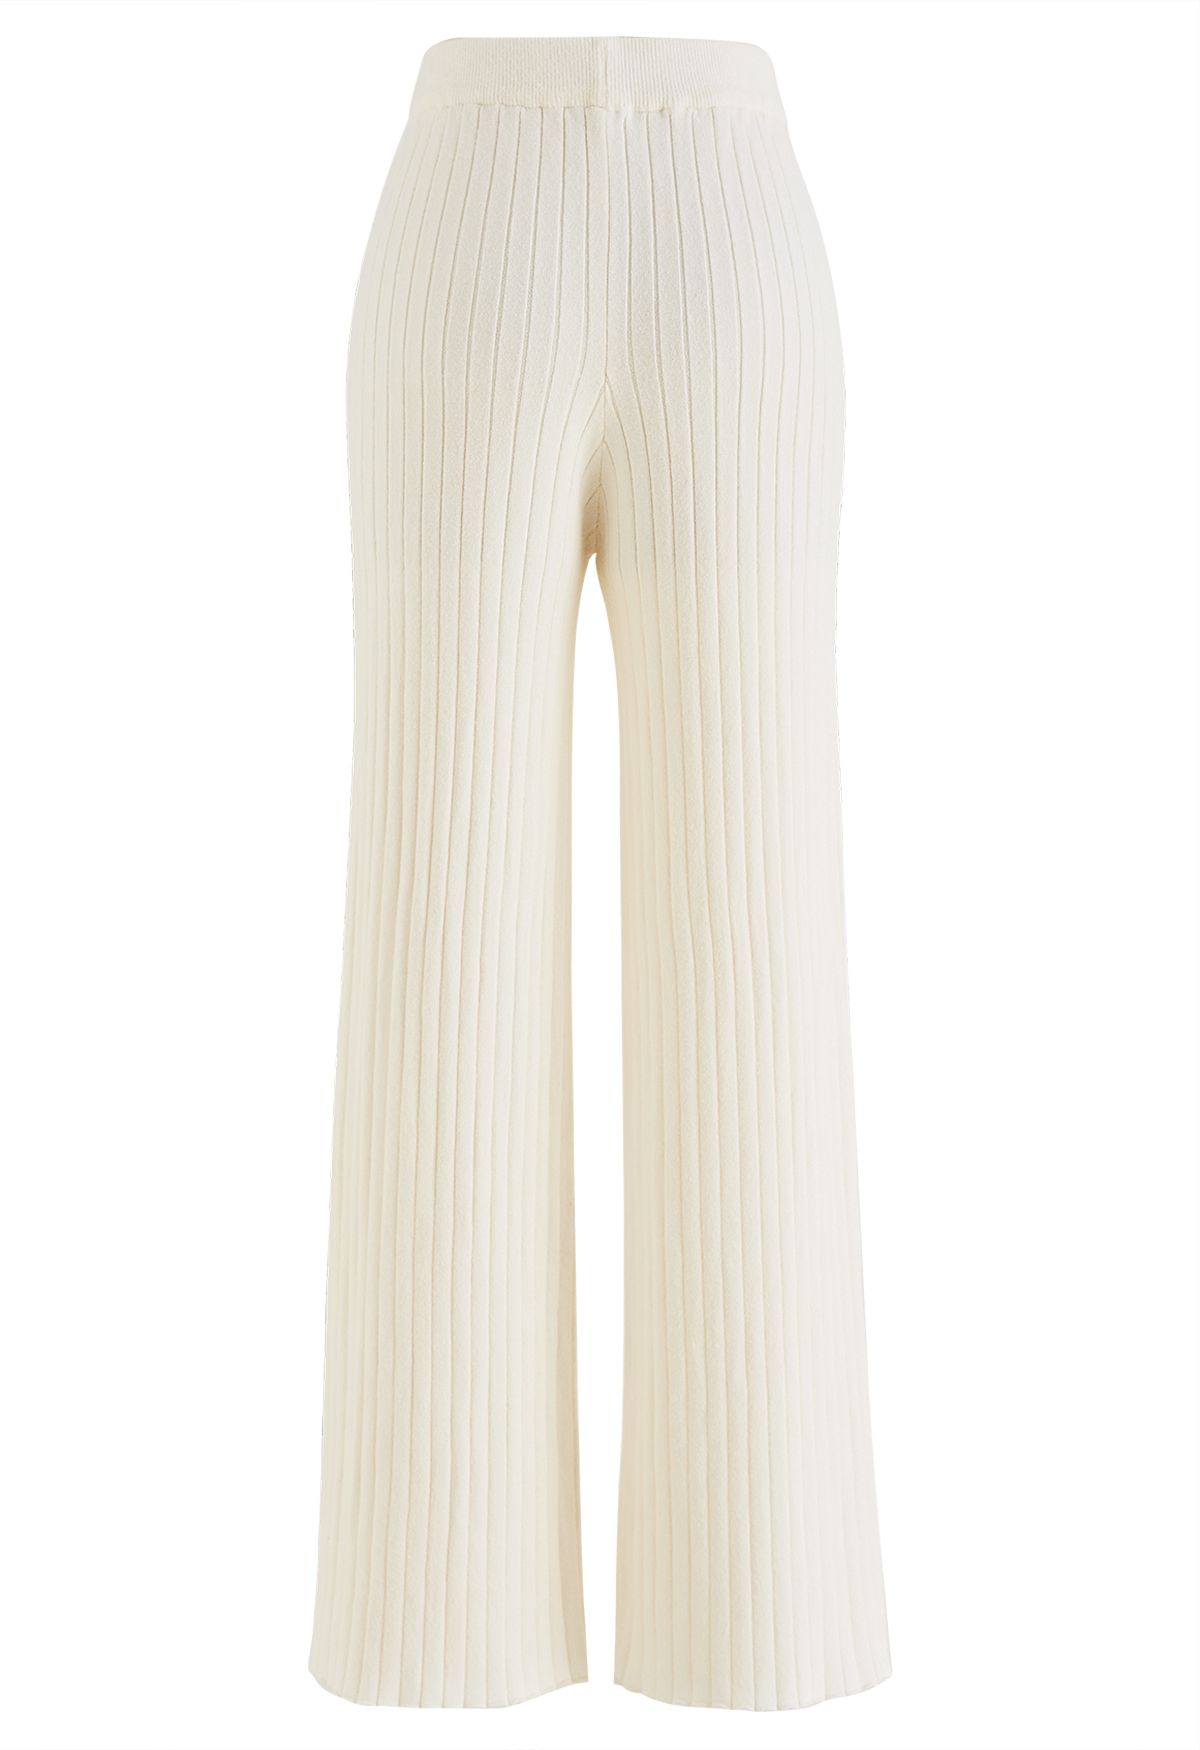 Ribbed Straight Leg Knit Pants in Cream - Retro, Indie and Unique Fashion